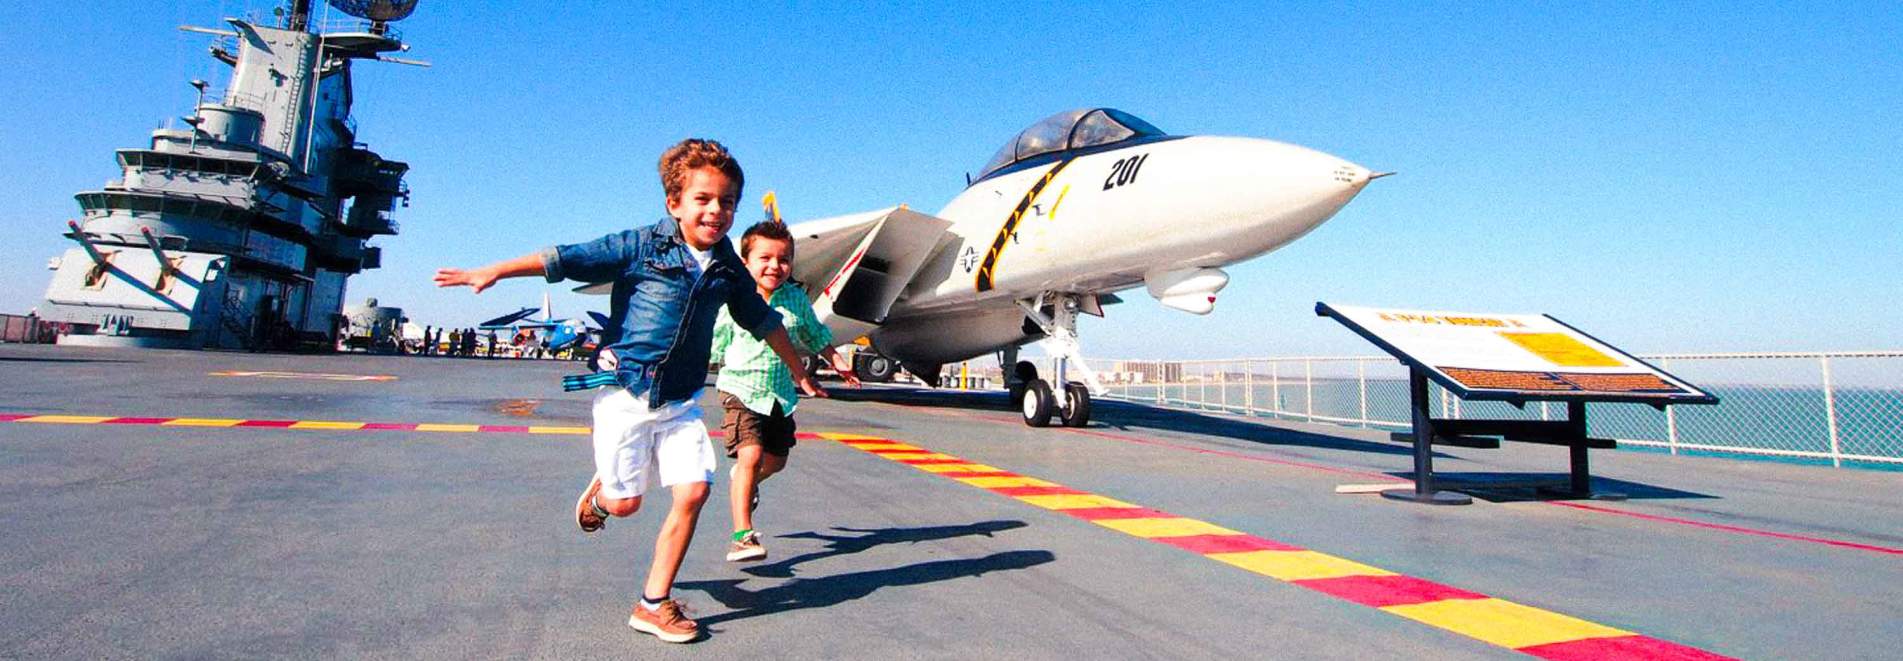 Kids visiting aircraft carrier by K2 Productions Photography